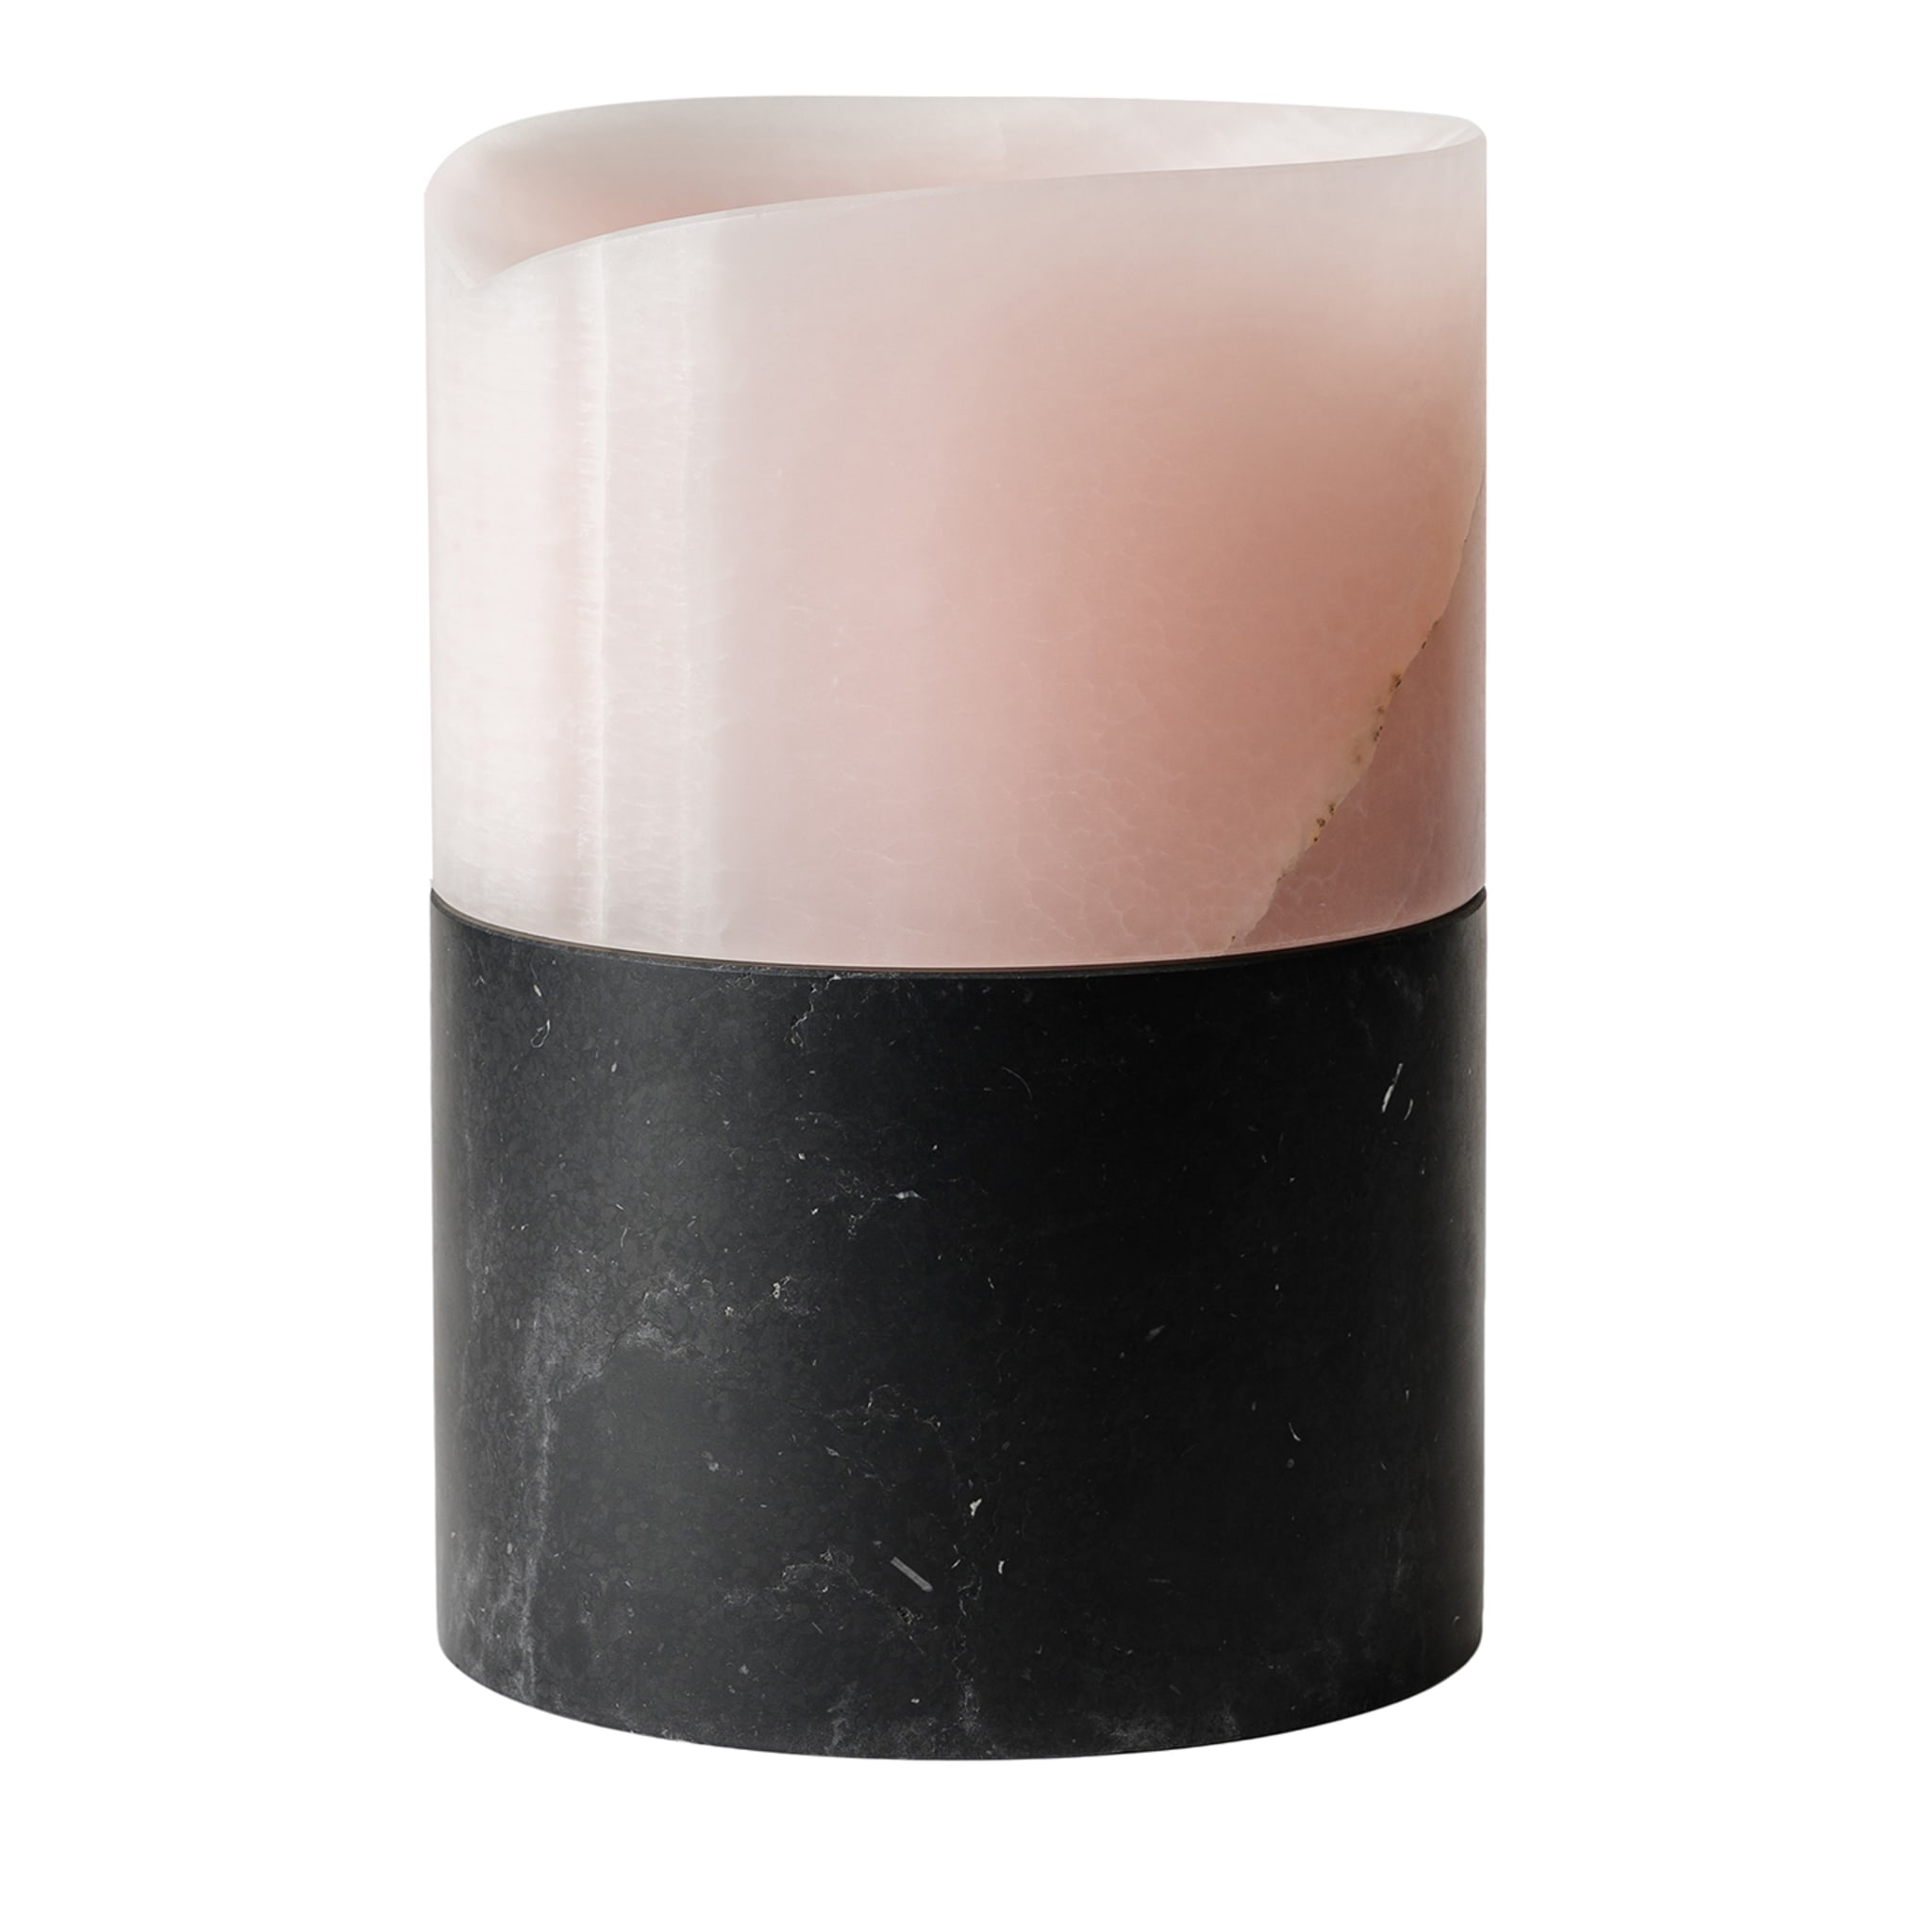 Vase Here and Now Pinkx Onyx et Marquina noir #2 - Vue principale